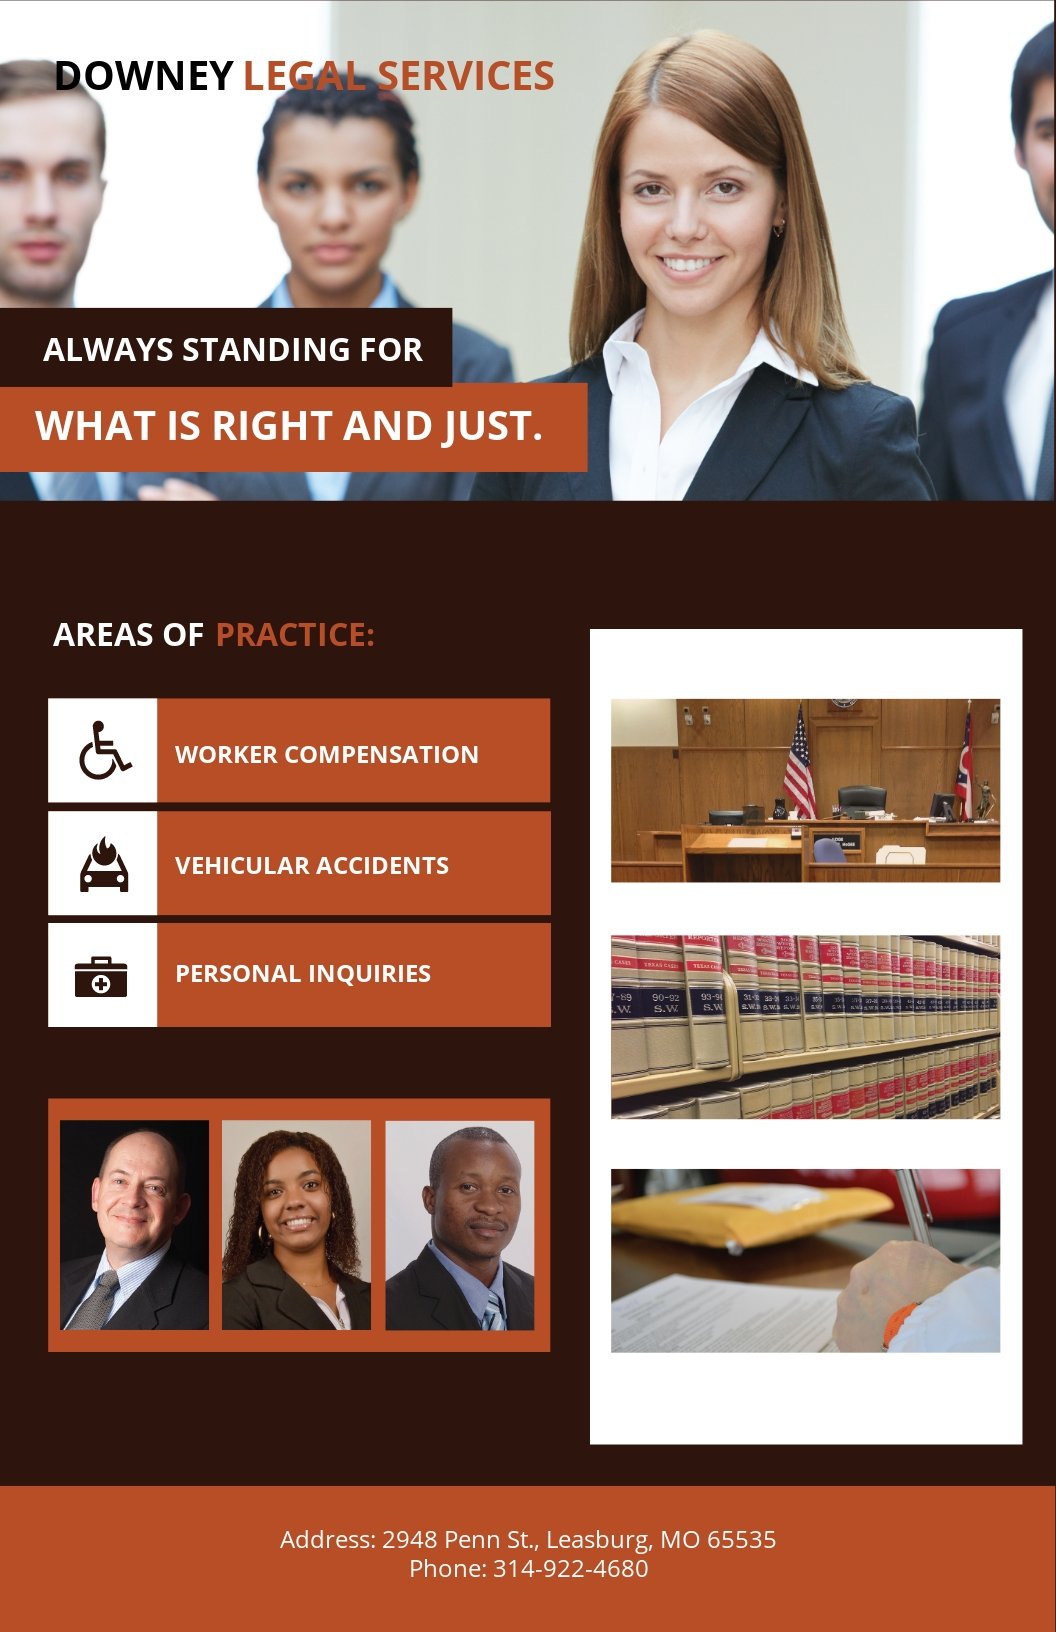 Free Legal Services Poster Template.jpe